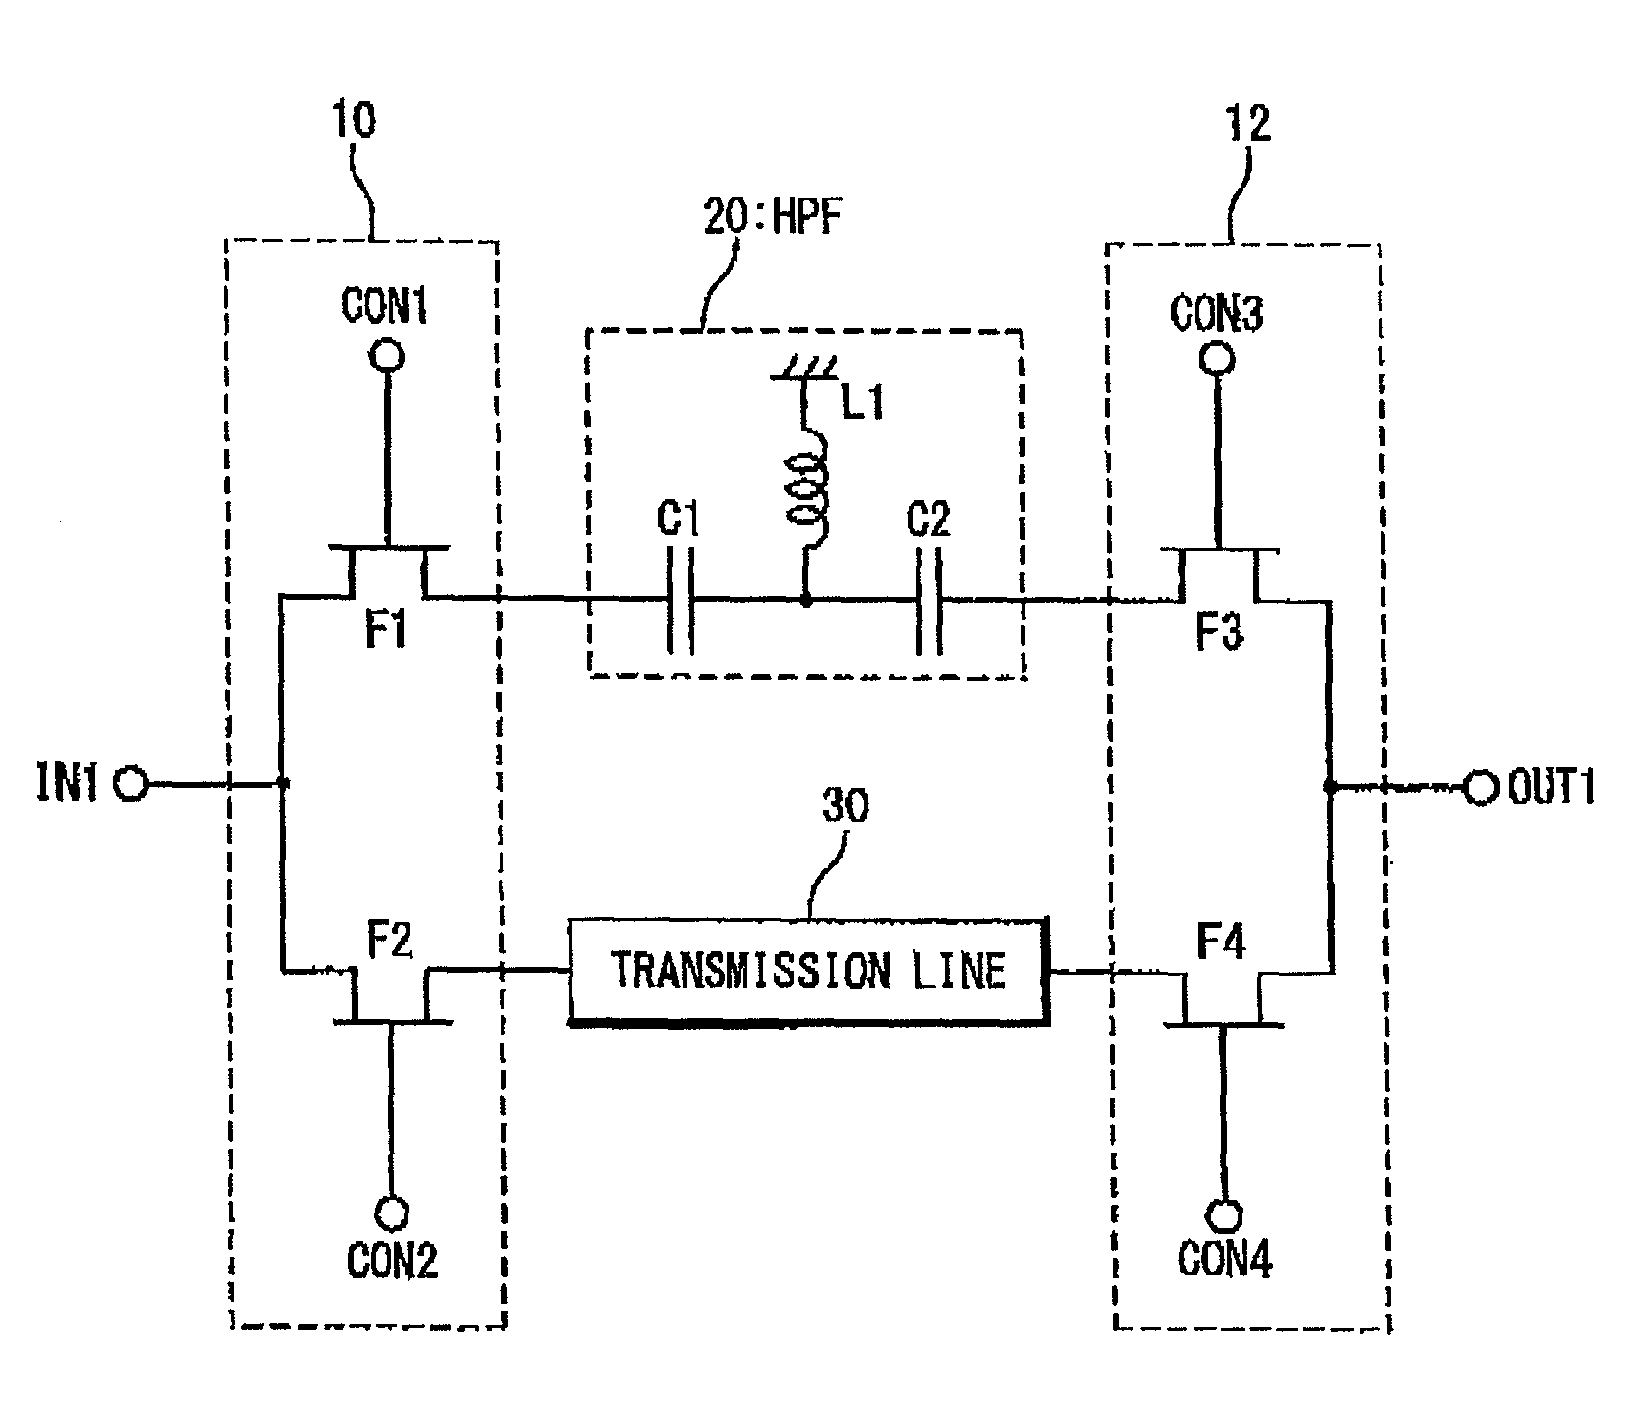 Phase shifter having switchable signal paths where one signal path includes no shunt capacitor and inductor